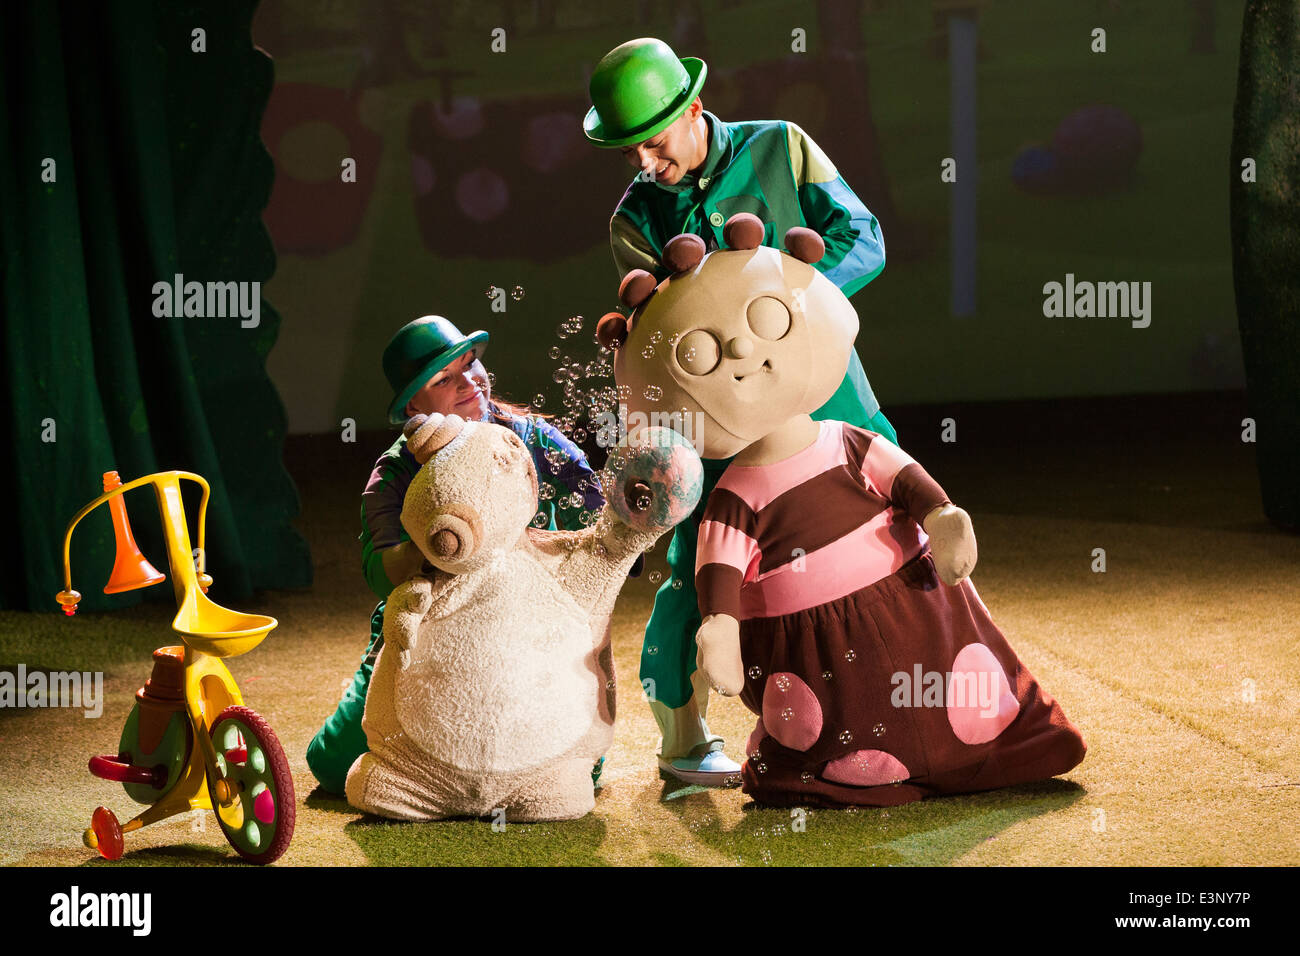 Makka pakka washes the face of a Tombliboo: In The Night Garden character /  characters. UK Stock Photo - Alamy